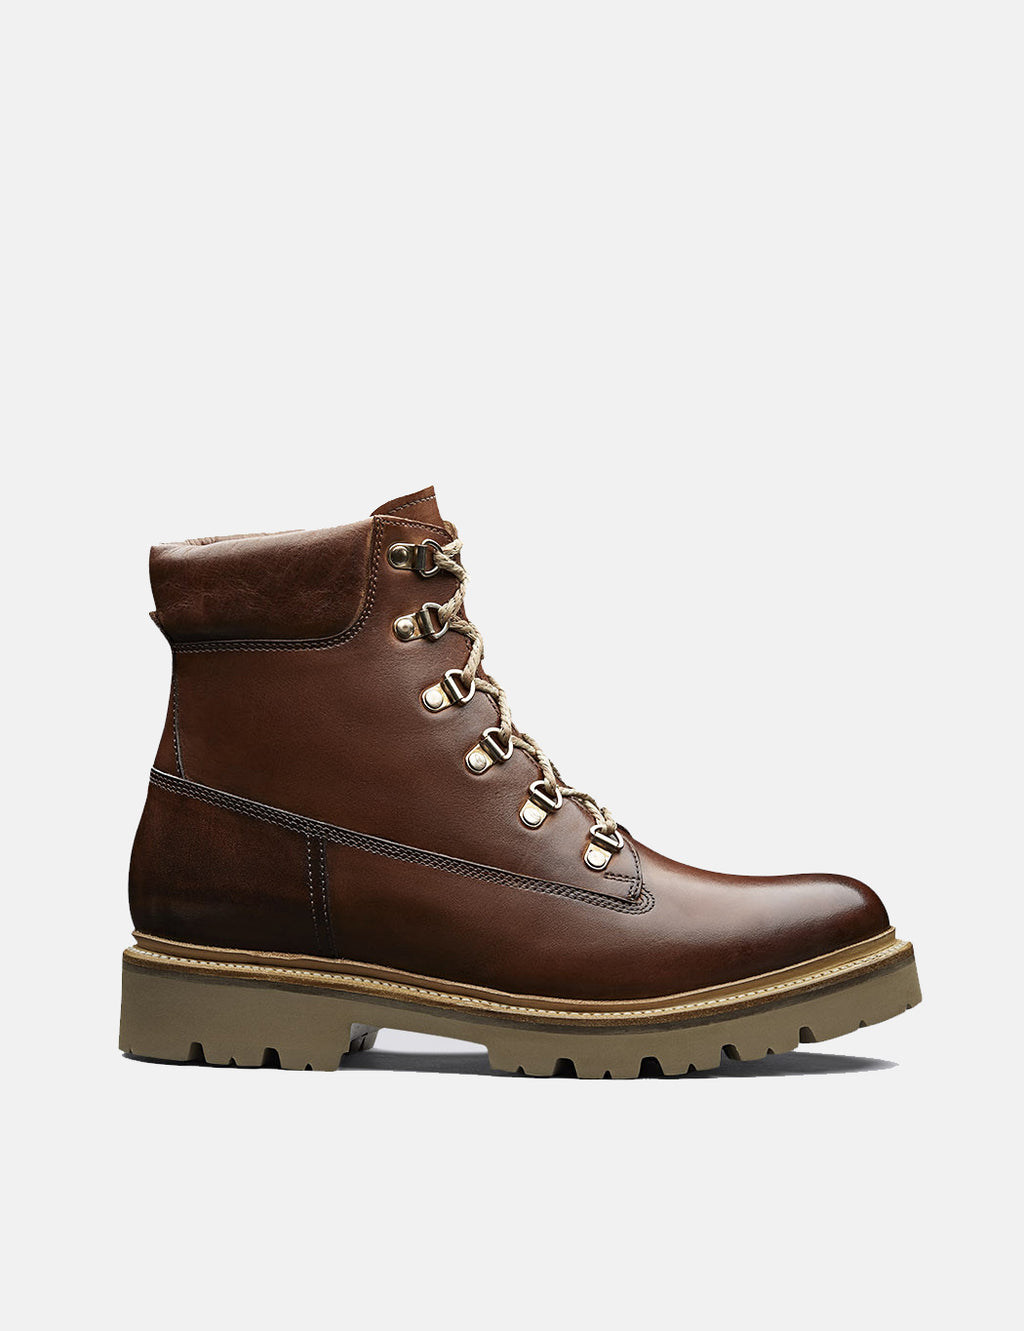 Grenson Rutherford Boot (Hand Painted) - Tan | URBANEXCESS. – URBAN EXCESS